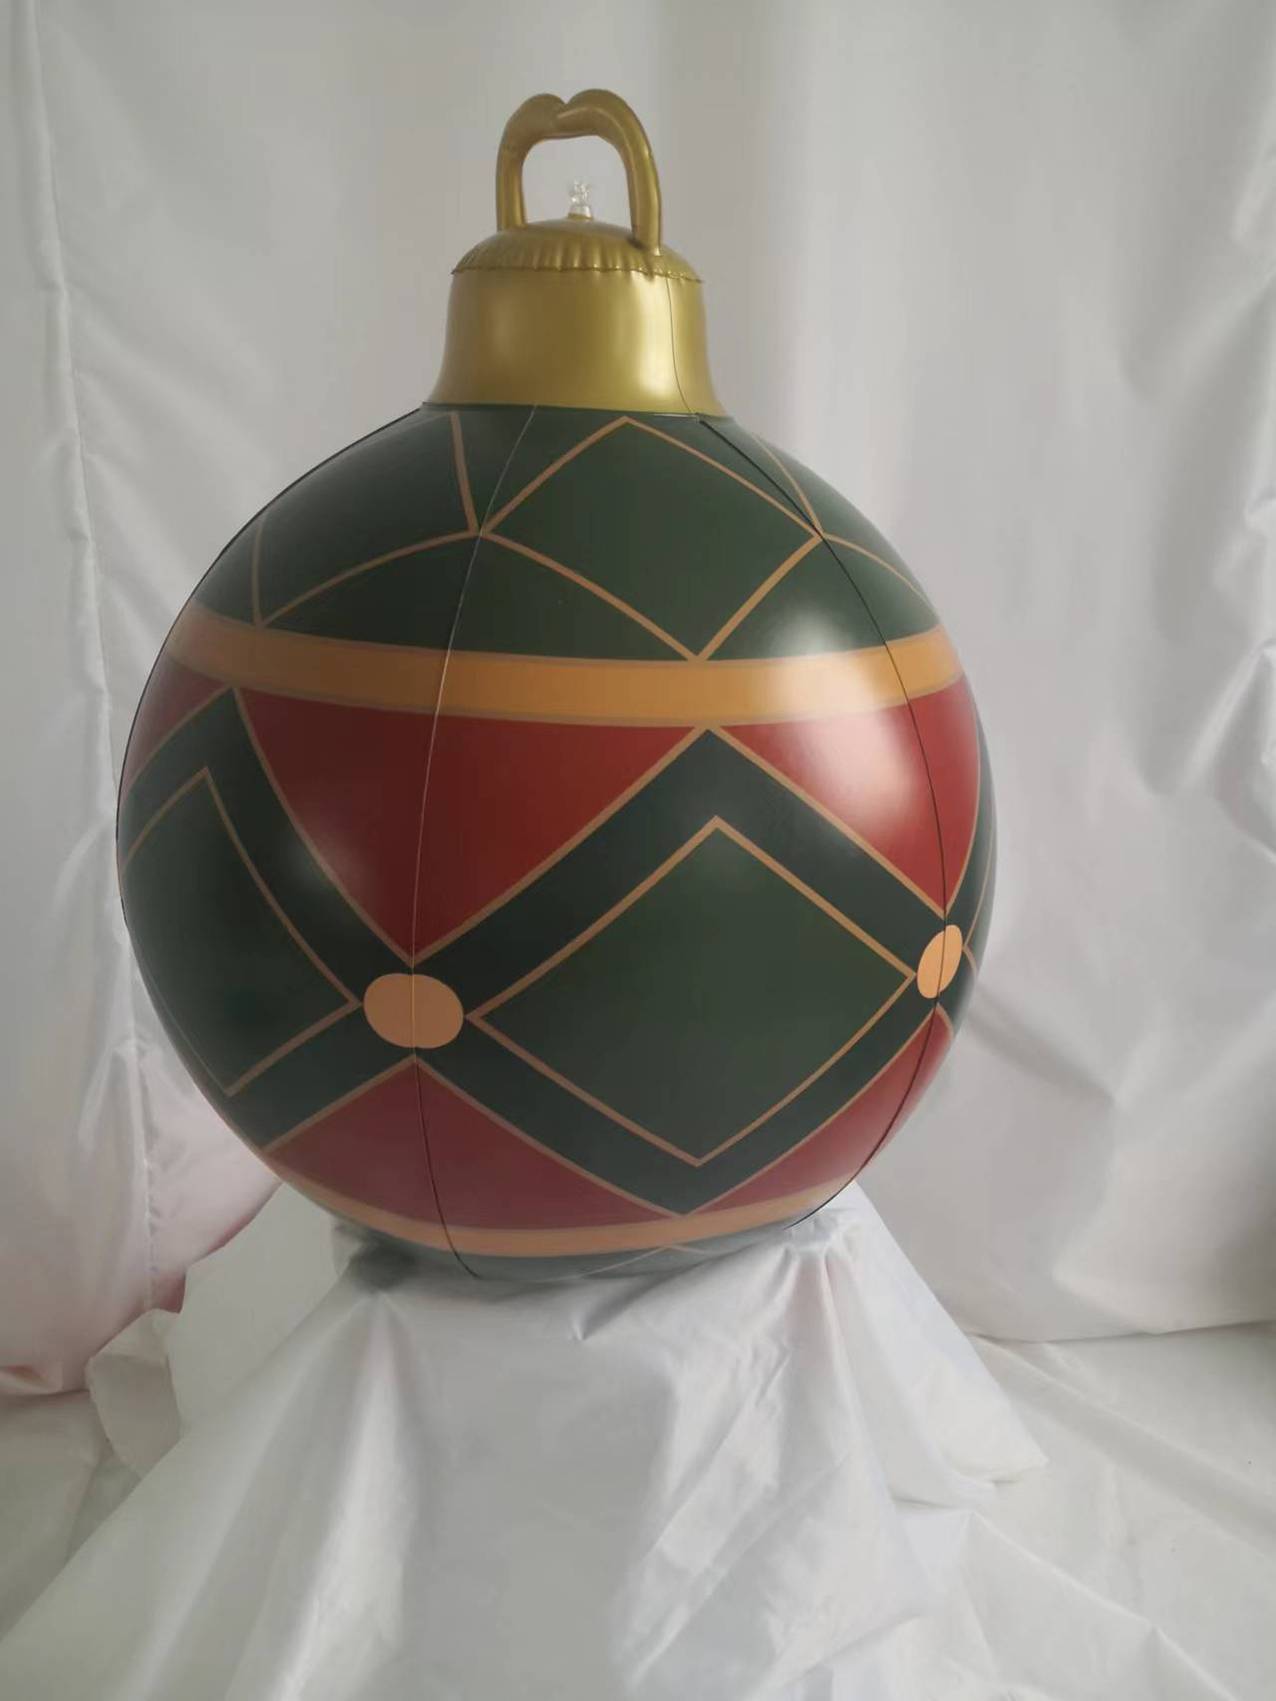 Customised Inflatable Indoor Outdoor Garden Xmas Decor Holiday Ornament Ball